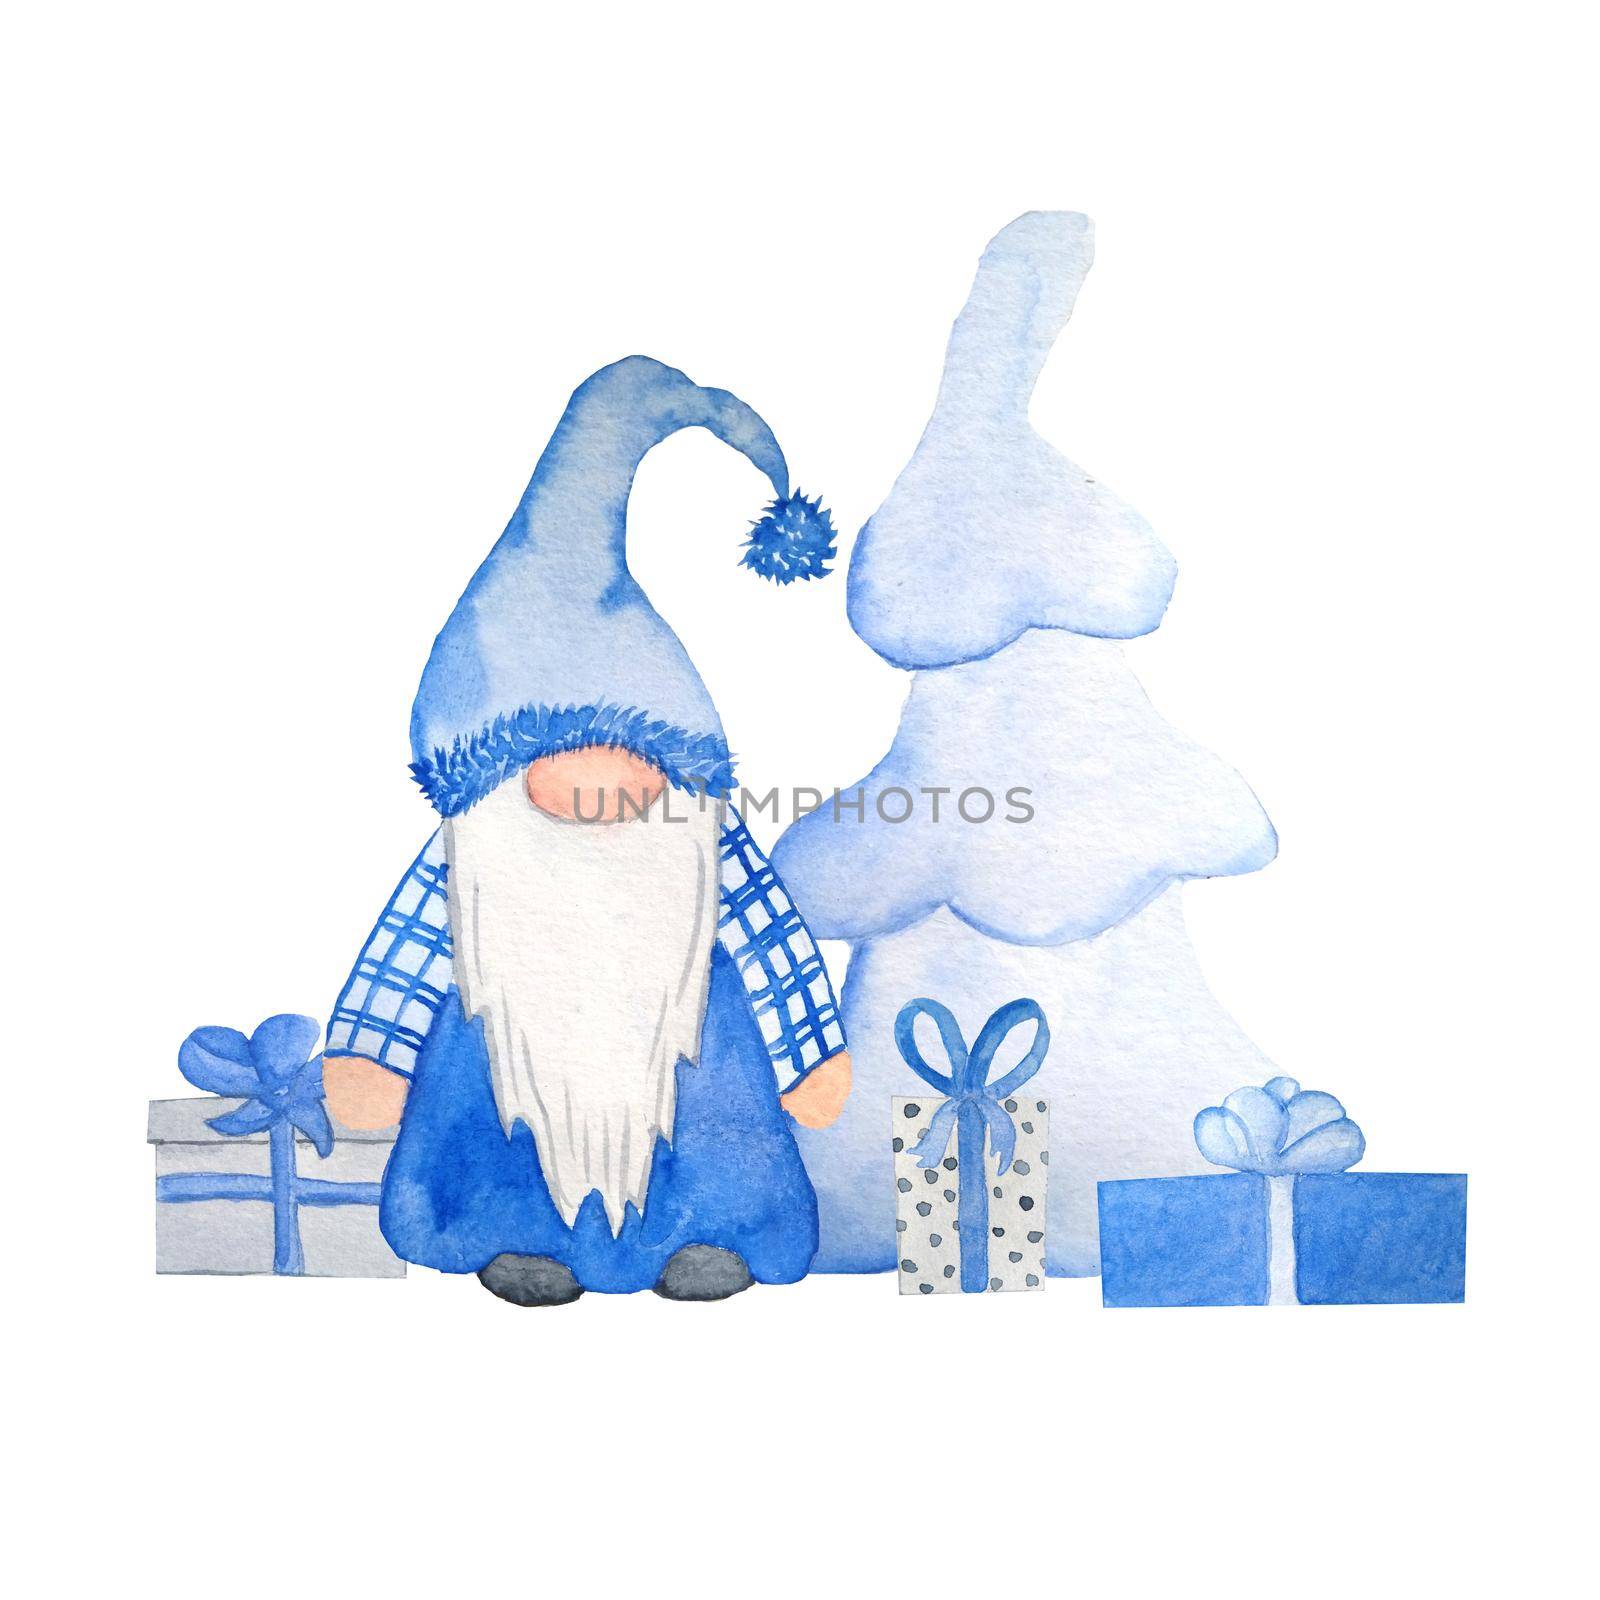 Watercolor hand drawn illustration of Christmas nordic scandinavian gnome. Design for new year cards invitations in neutral blue grey. Christmas tree presents gifts ornament decoration cartoon